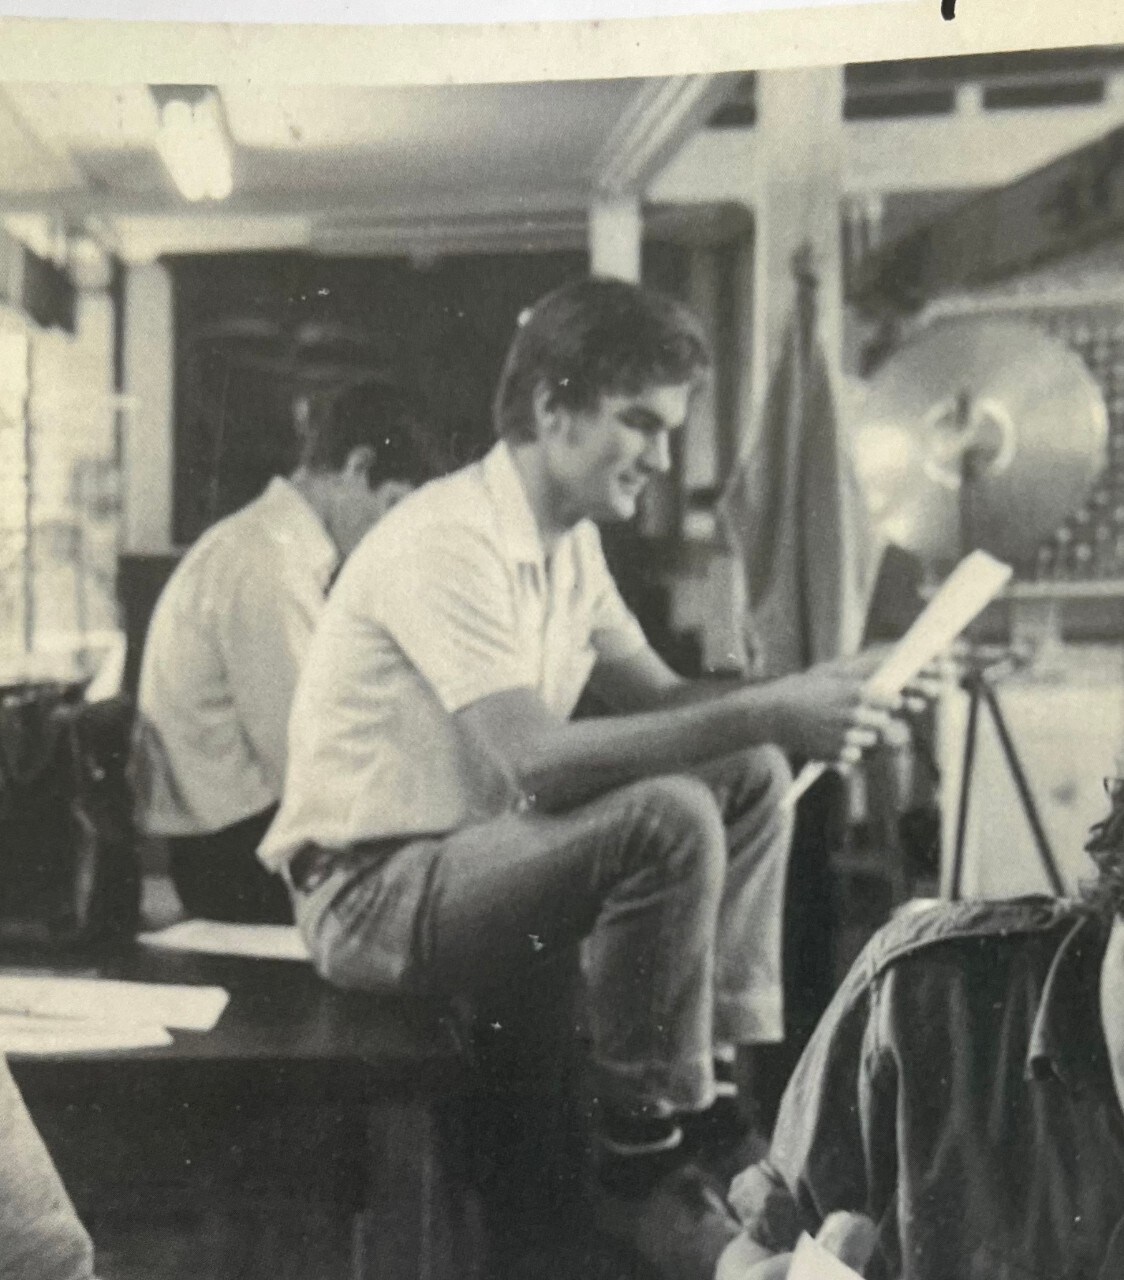 Old photo showing David Bell sitting on a table in a physics lab in 1969